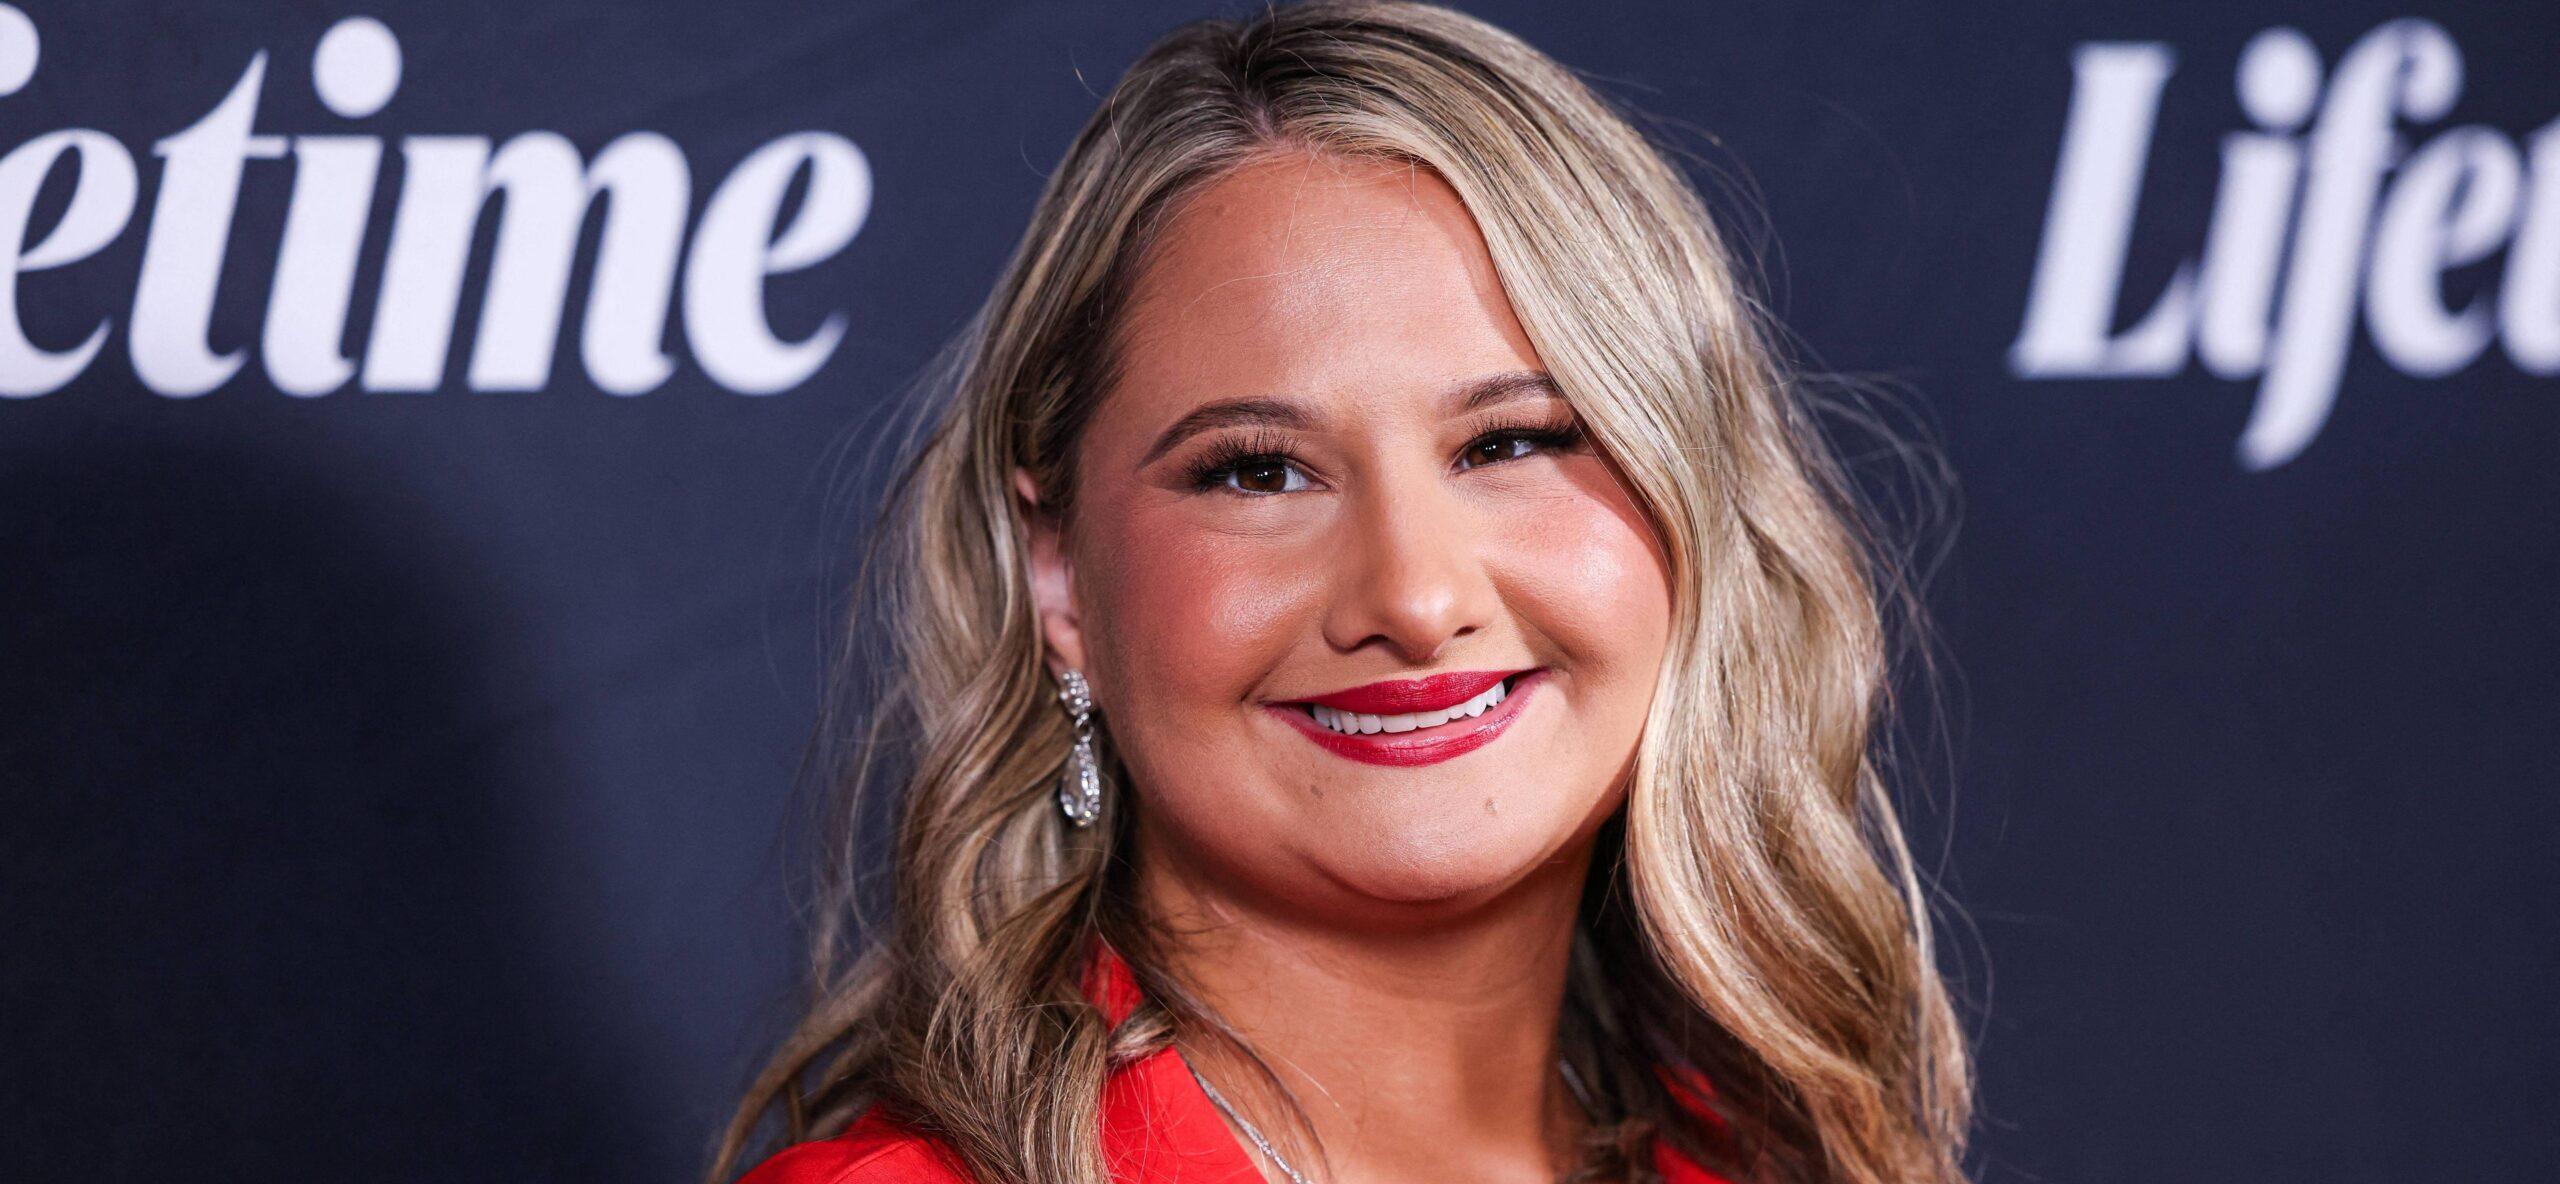 Gypsy Rose Blanchard attends An Evening With Lifetime: Conversations On Controversies FYC Event